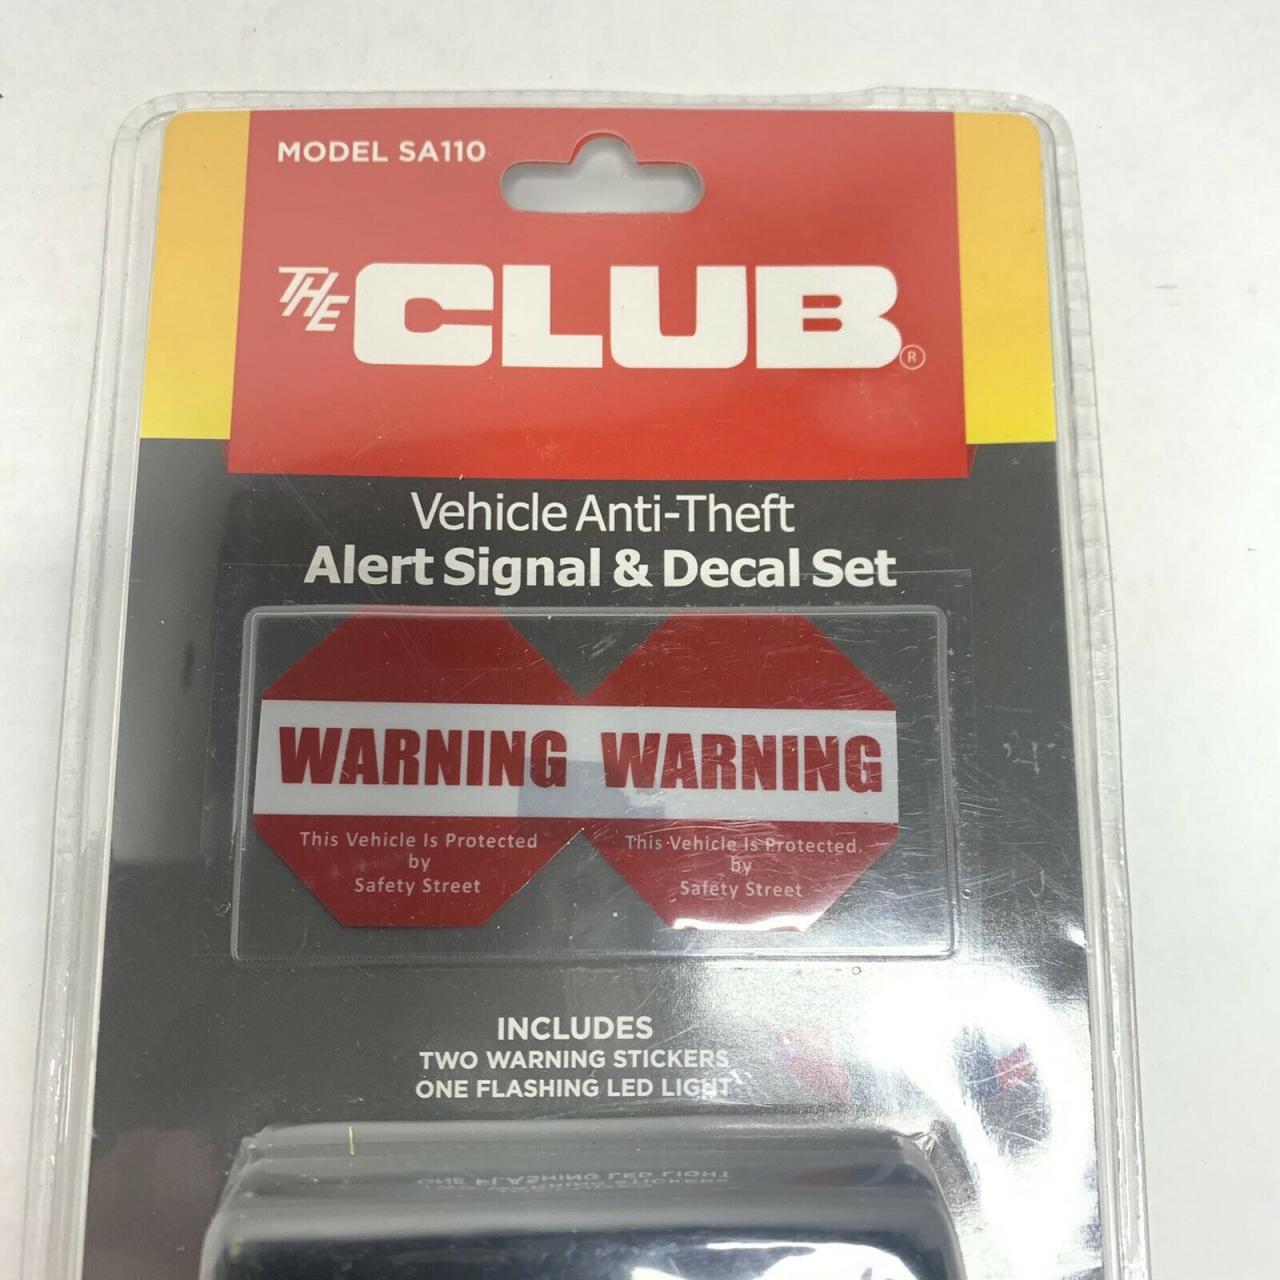 The Best Car Anti-Theft Devices (Review) in 2020 | Car Bibles